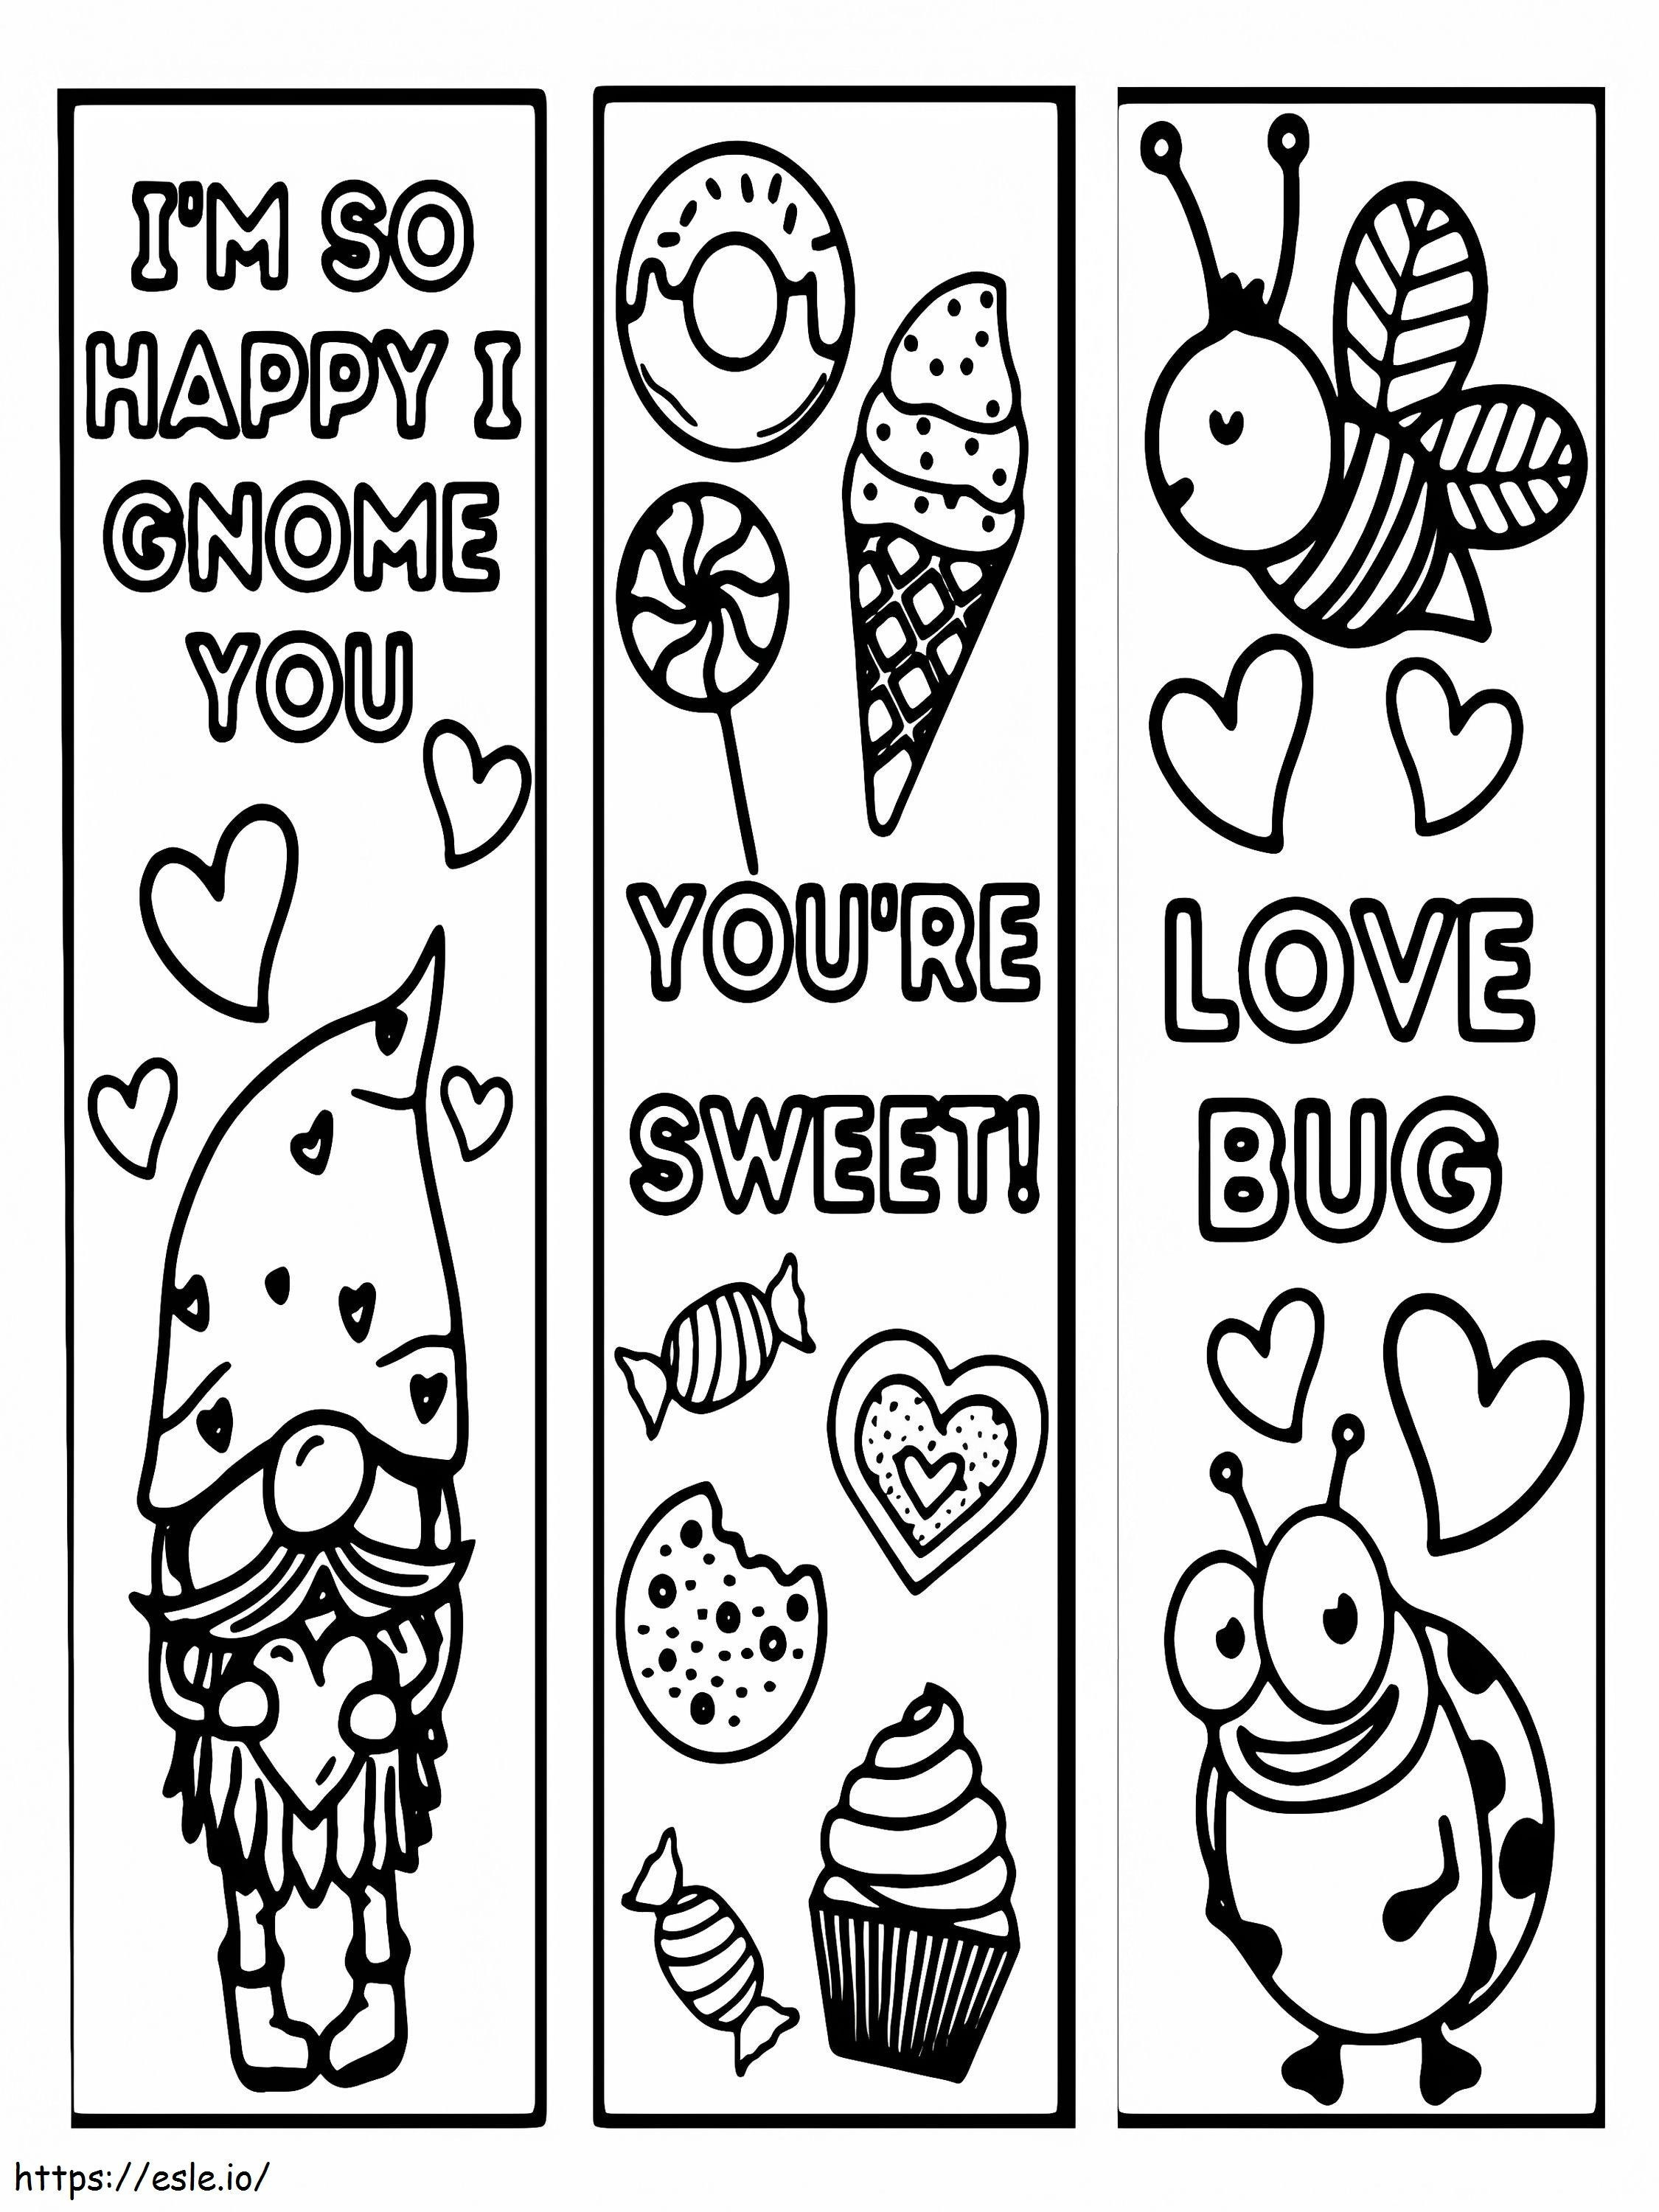 You Re Sweet Bookmark For Kids coloring page